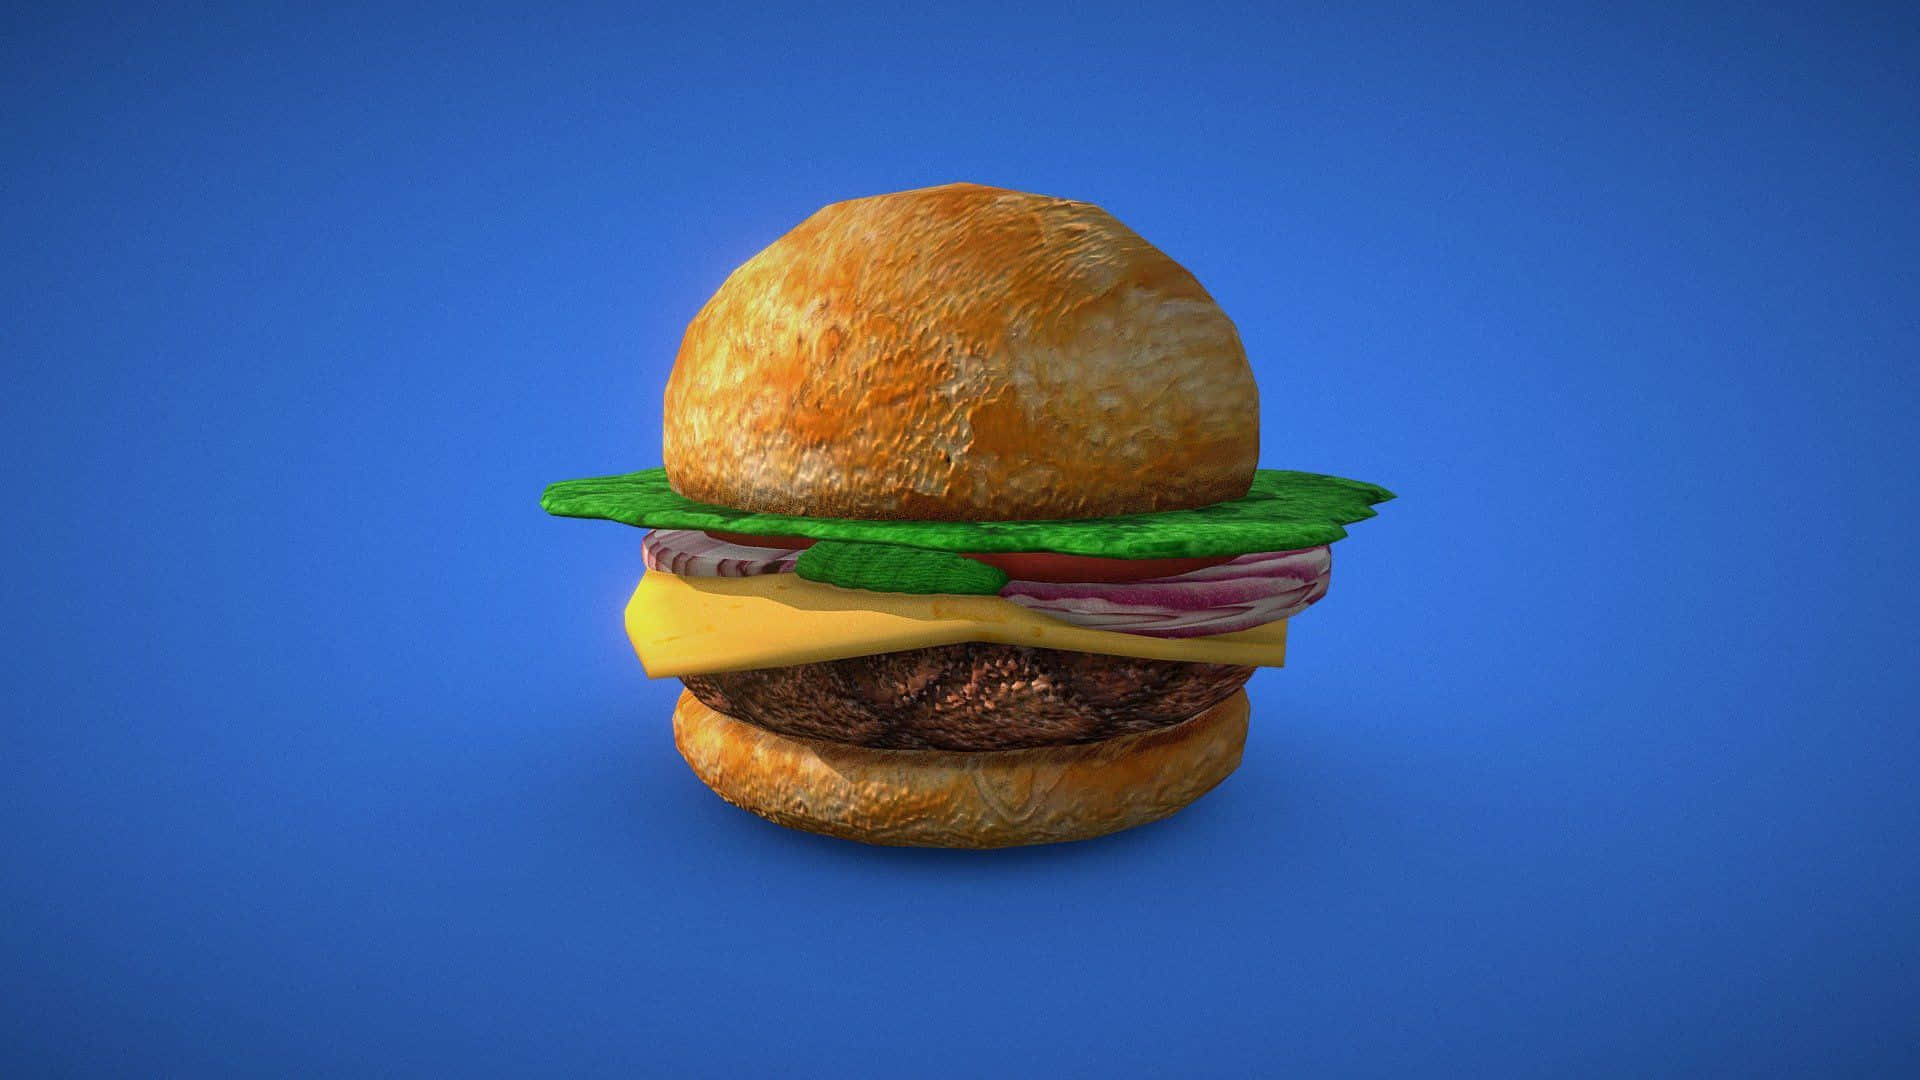 Delectable Krabby Patty Meal on a Plate Wallpaper